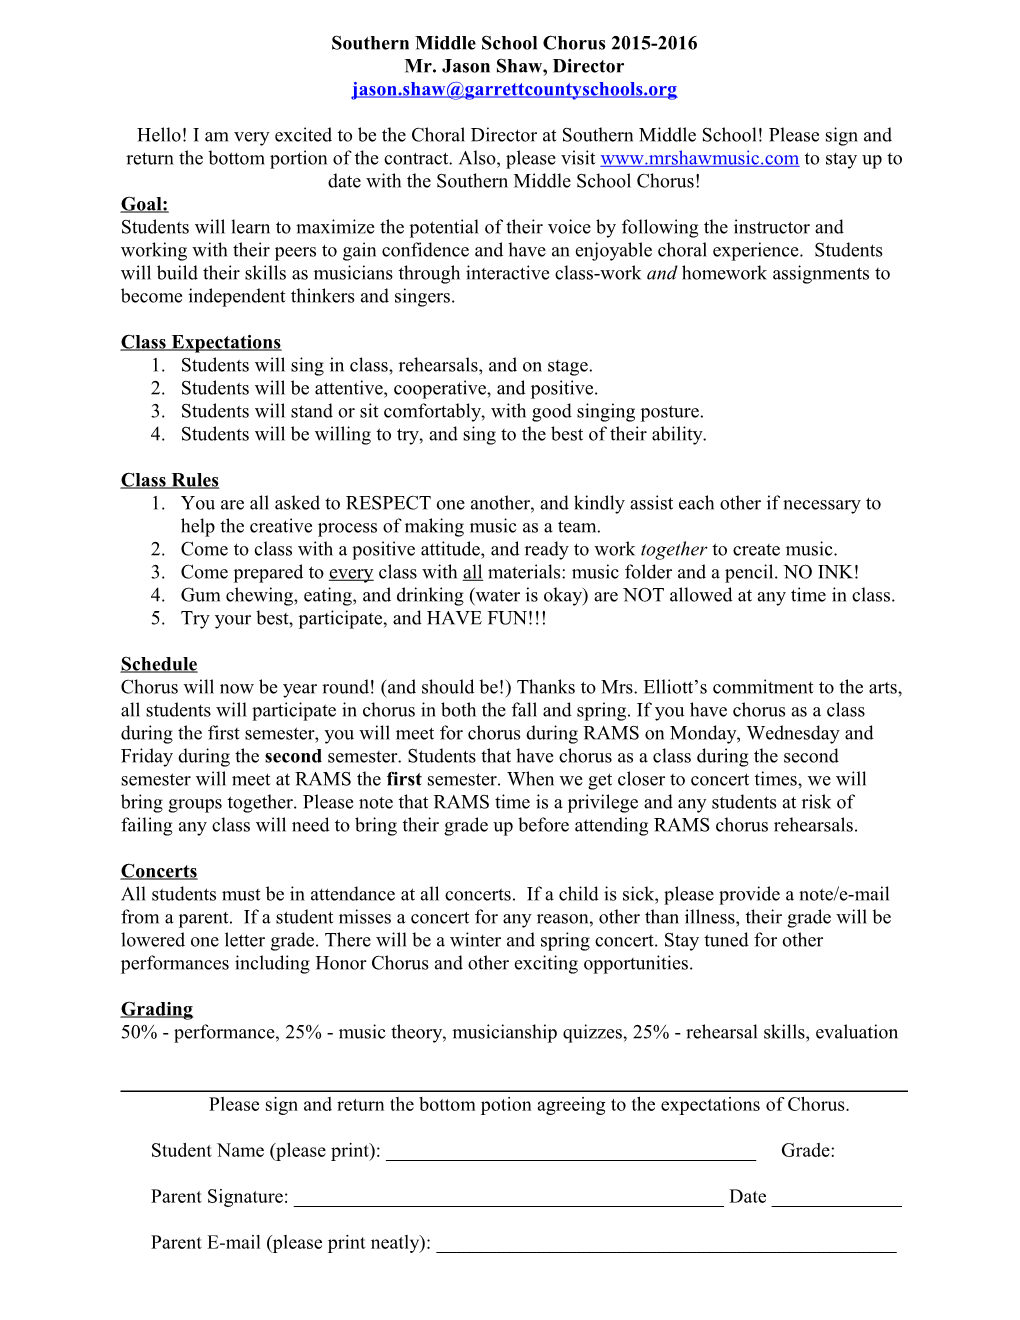 Middlesex Middle School Chorus Contract